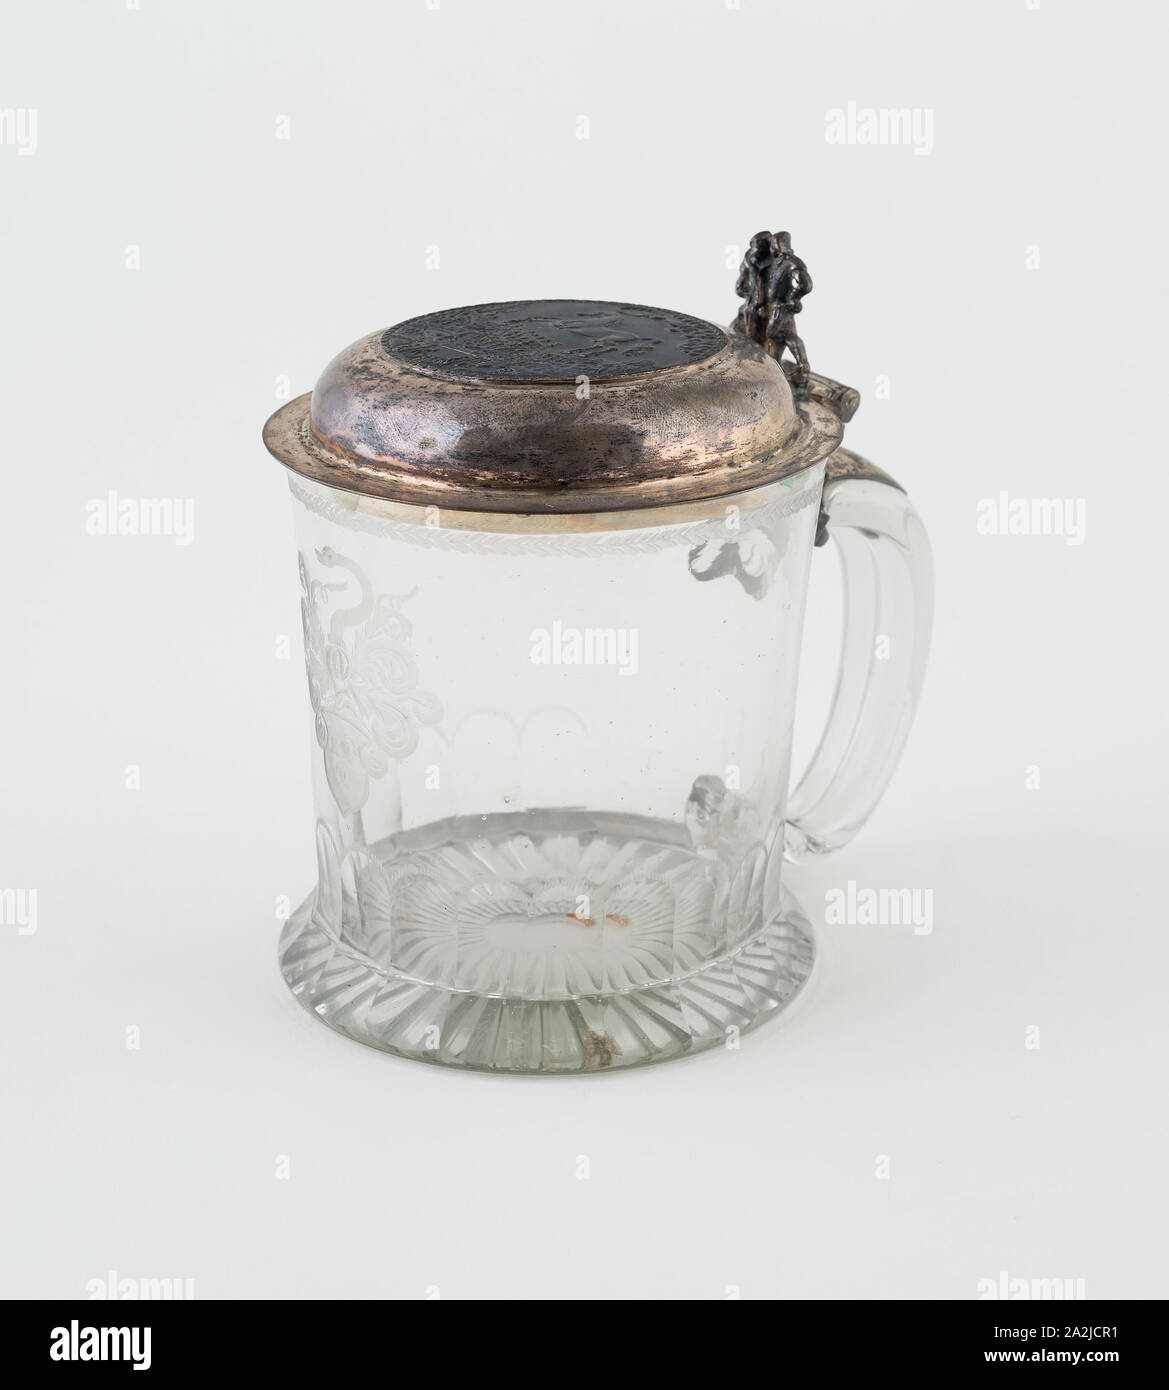 Tankard, c. 1730, Germany, Glass with silver cover, 14 x 10.3 cm (5 1/2 x 4 1/16 in Stock Photo